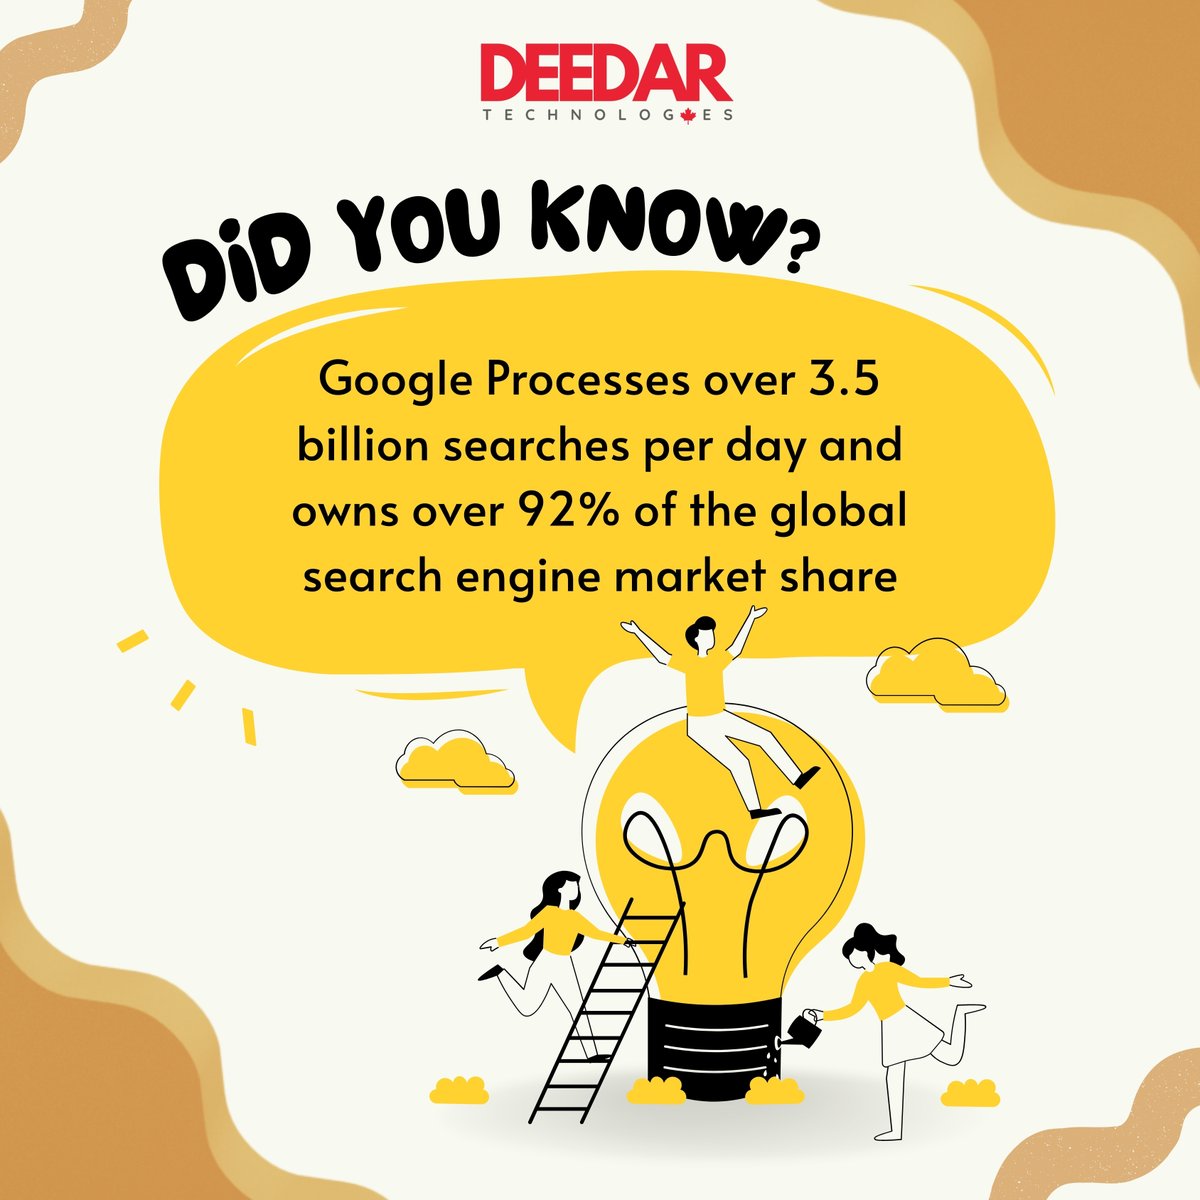 Open your door to success with Deedar Technologies, your trusted digital marketing company. Let us elevate your online presence and drive results together.

#DeedarTechnologies #DigitalMarketer #DigialMarketingStrategies #DigialMarketingTips #DigitalGrowth #GrowTogether #Grow